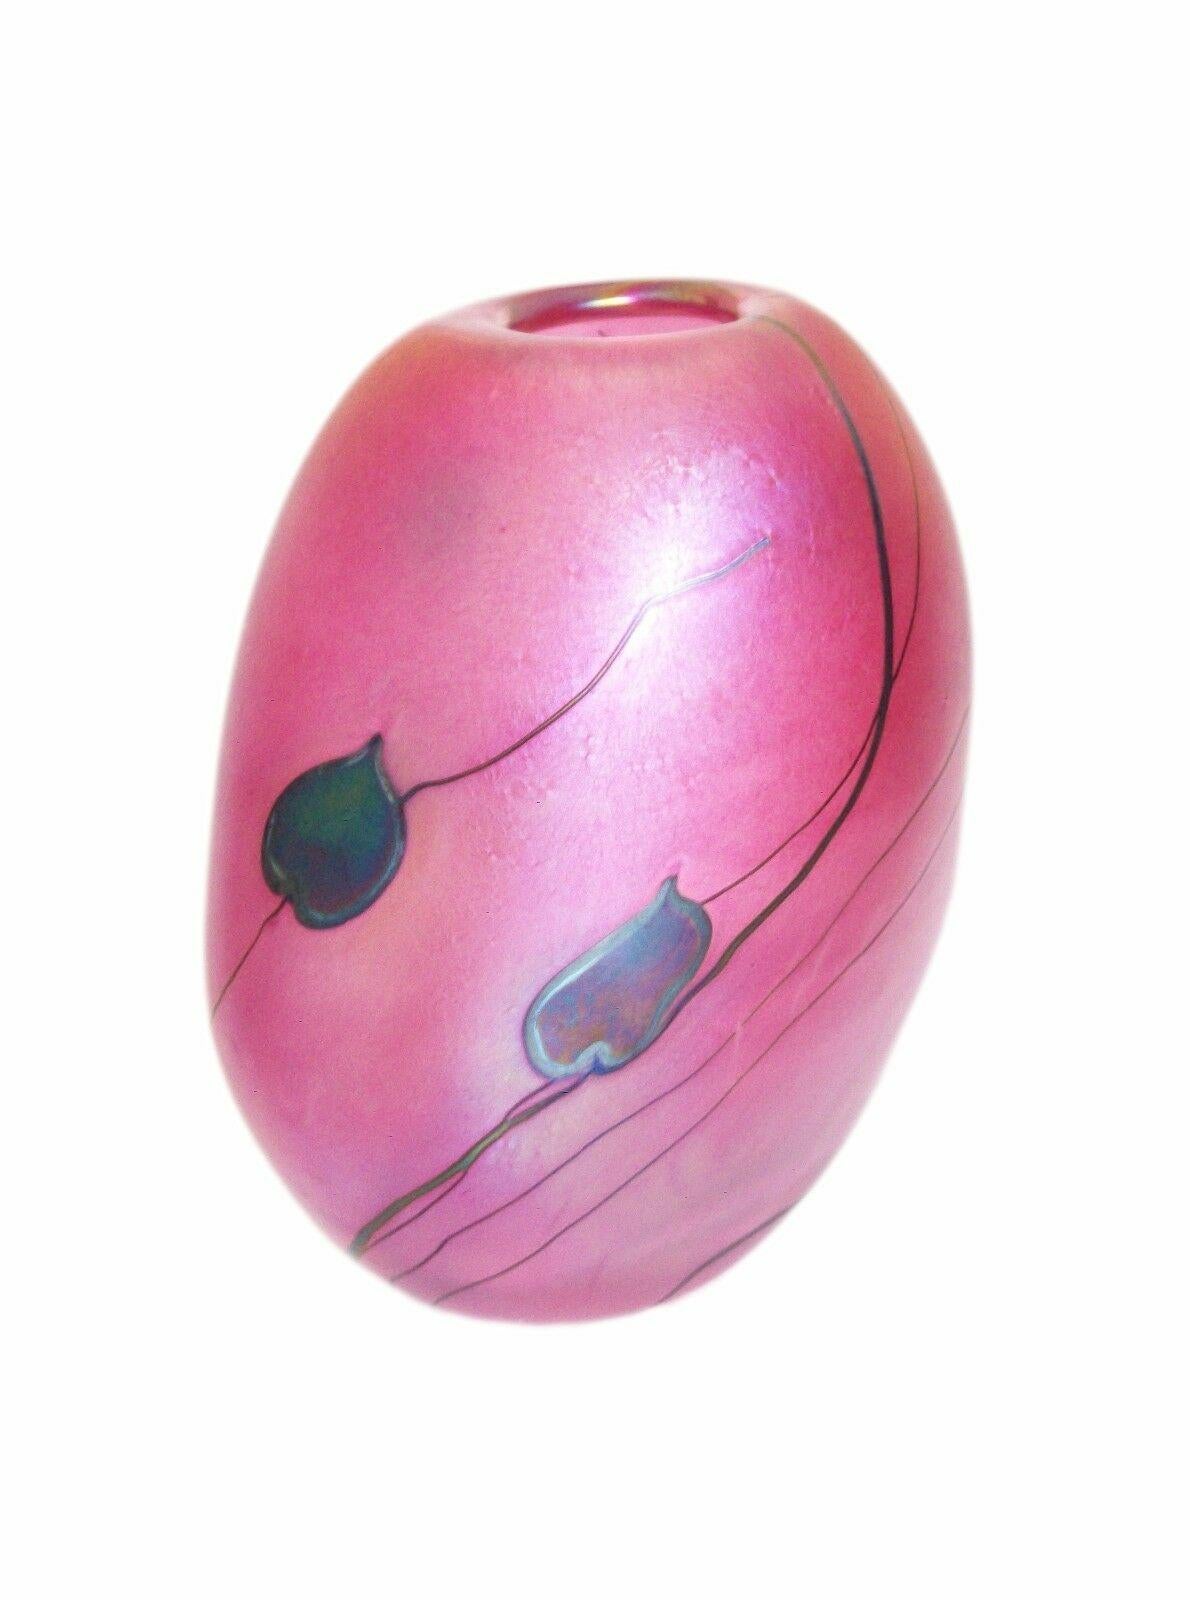 Glasform John Ditchfield (Designer) - modern paperweight glass vase - heavy pink iridescent glass with trailing vines and 'oil spot' leaves - hand blown - signed on the base - United Kingdom - late 20th century.
 
Excellent / mint vintage